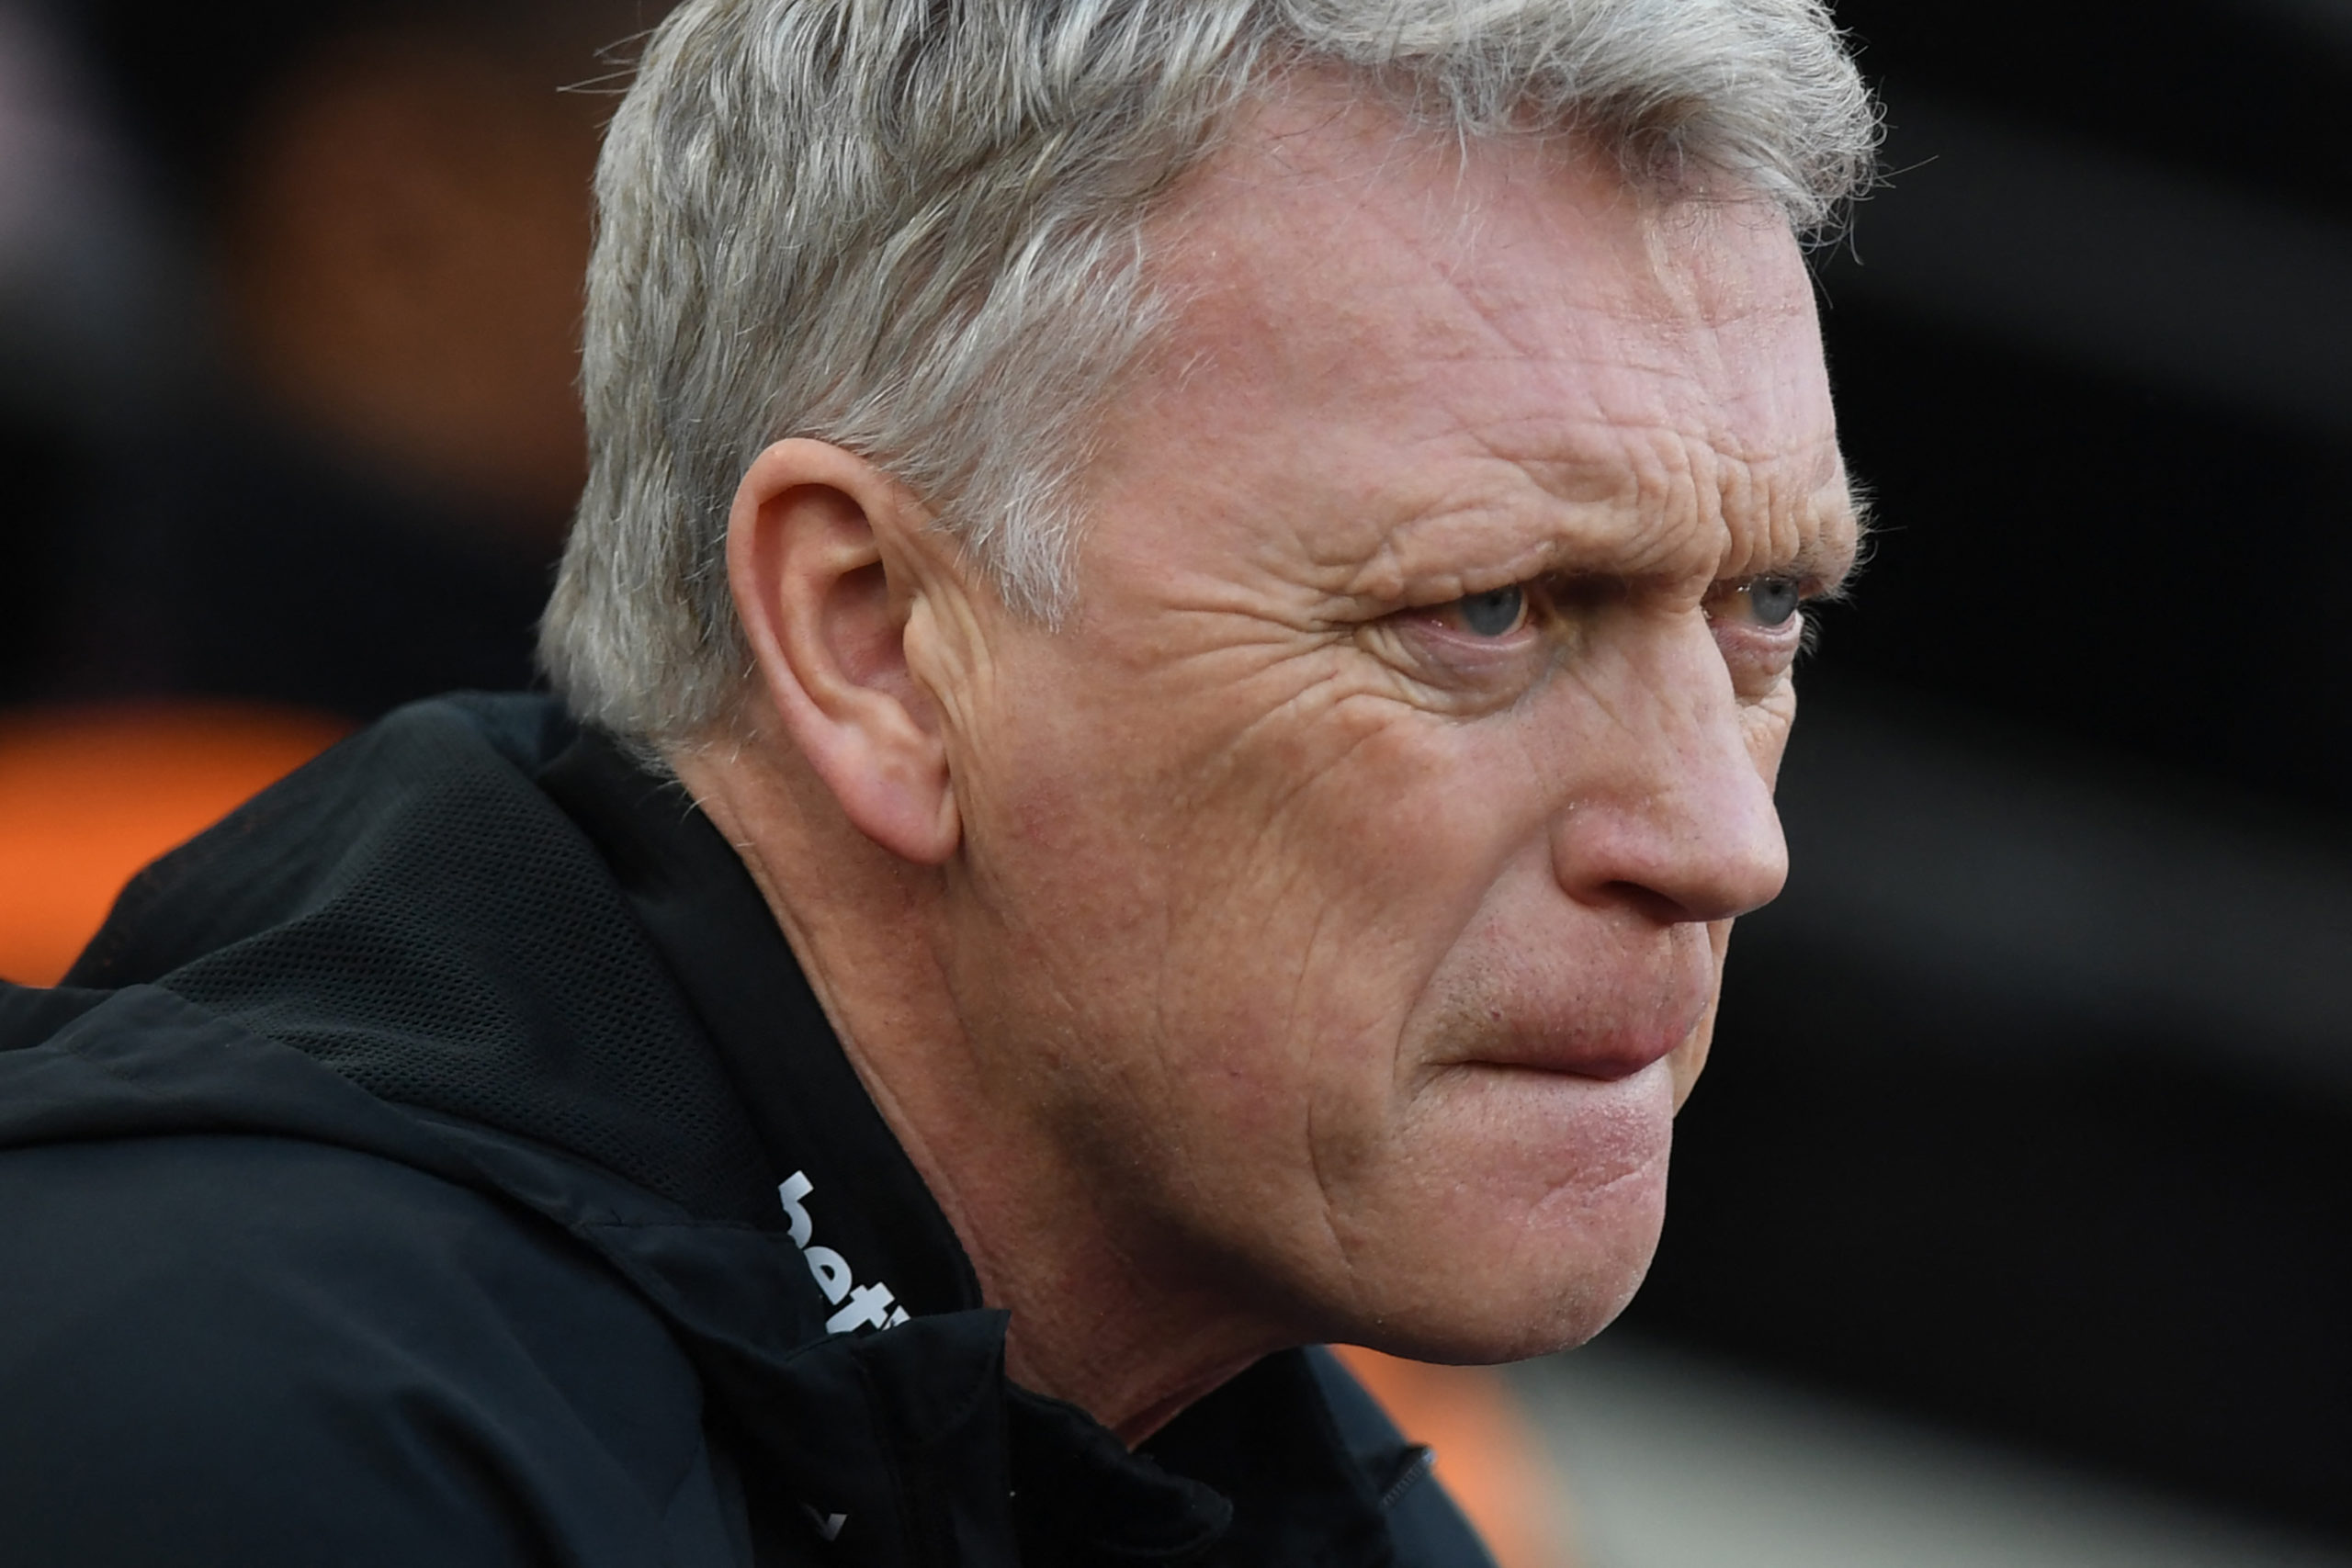 David Moyes asks baffling striker question after being quizzed by press on Michail Antonio